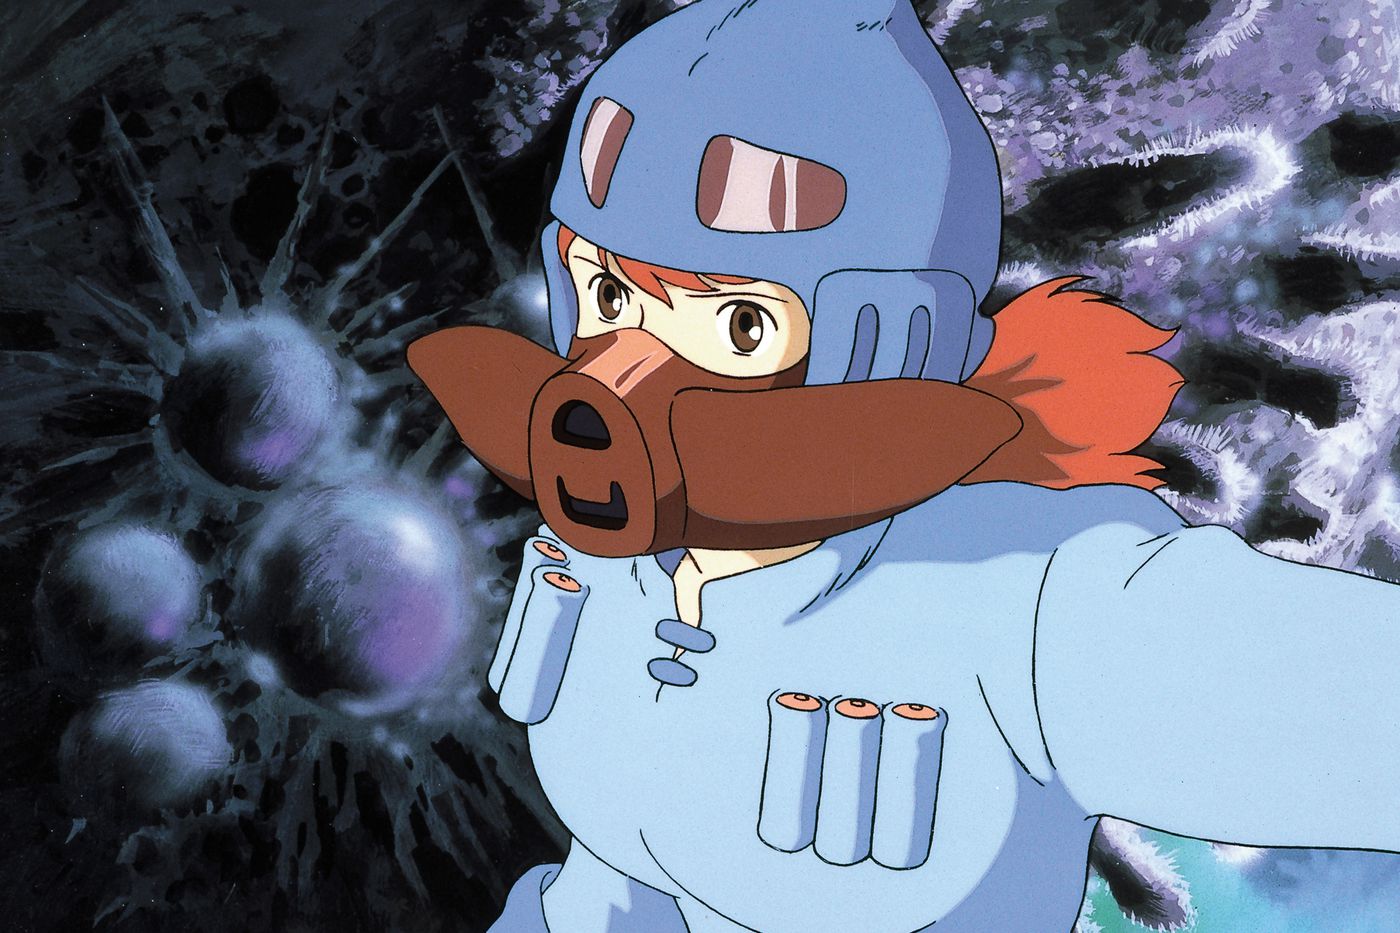 Top 20 Japanese Anime Films Of All Time - FandomWire